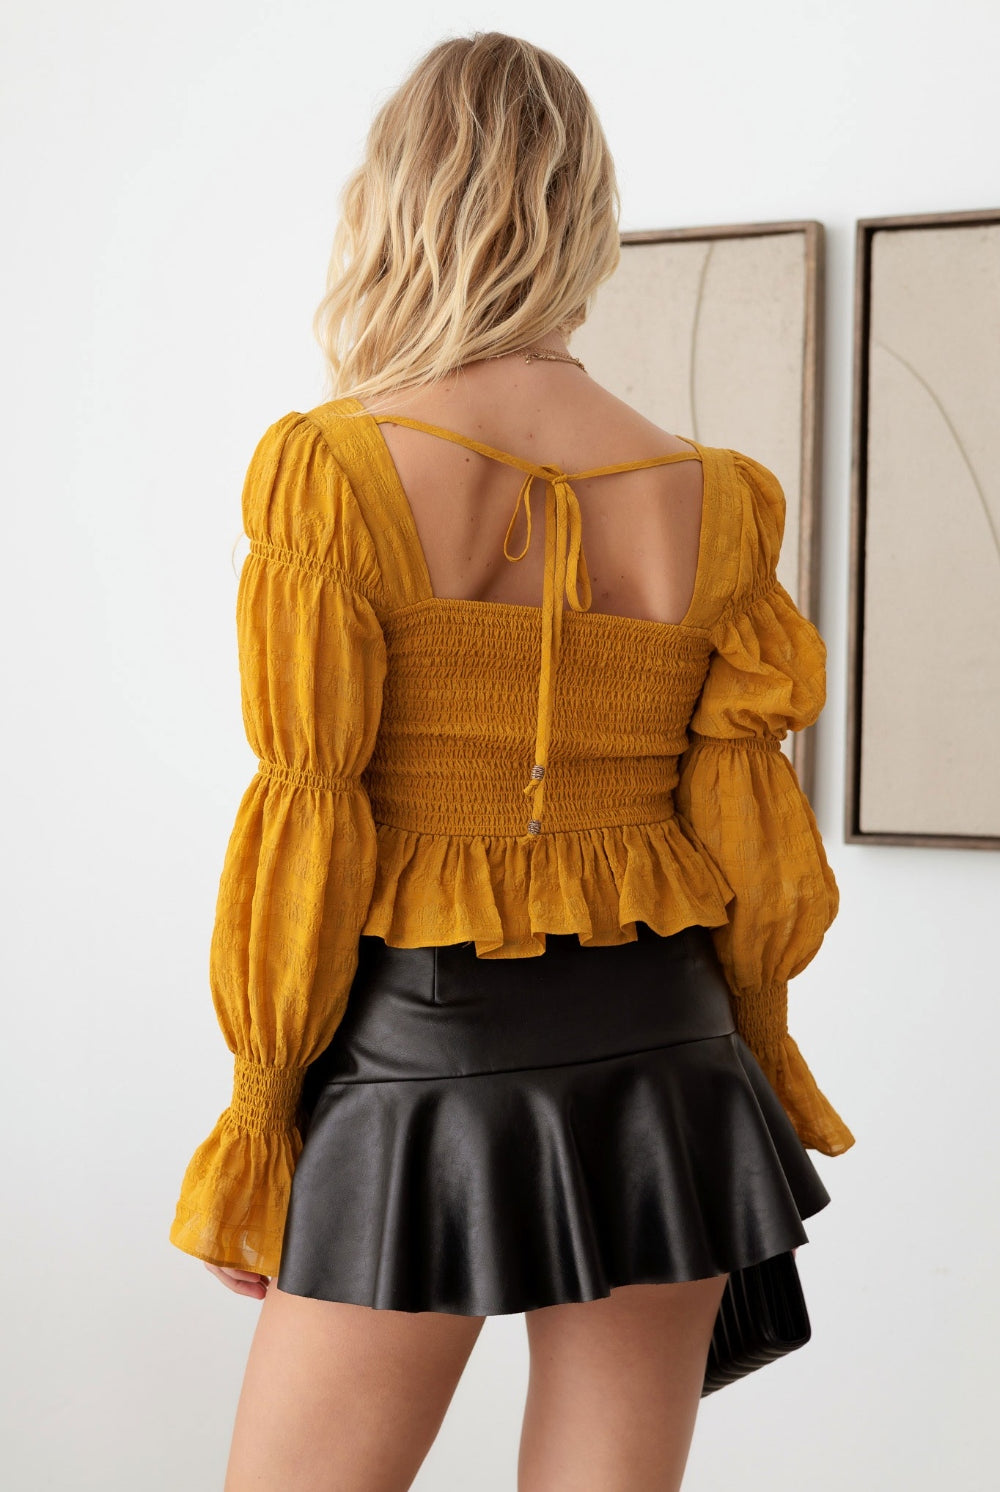 Fashion-forward woman in a mustard boho long sleeve top with delicate ruffle detailing, embodying an effortlessly chic style.